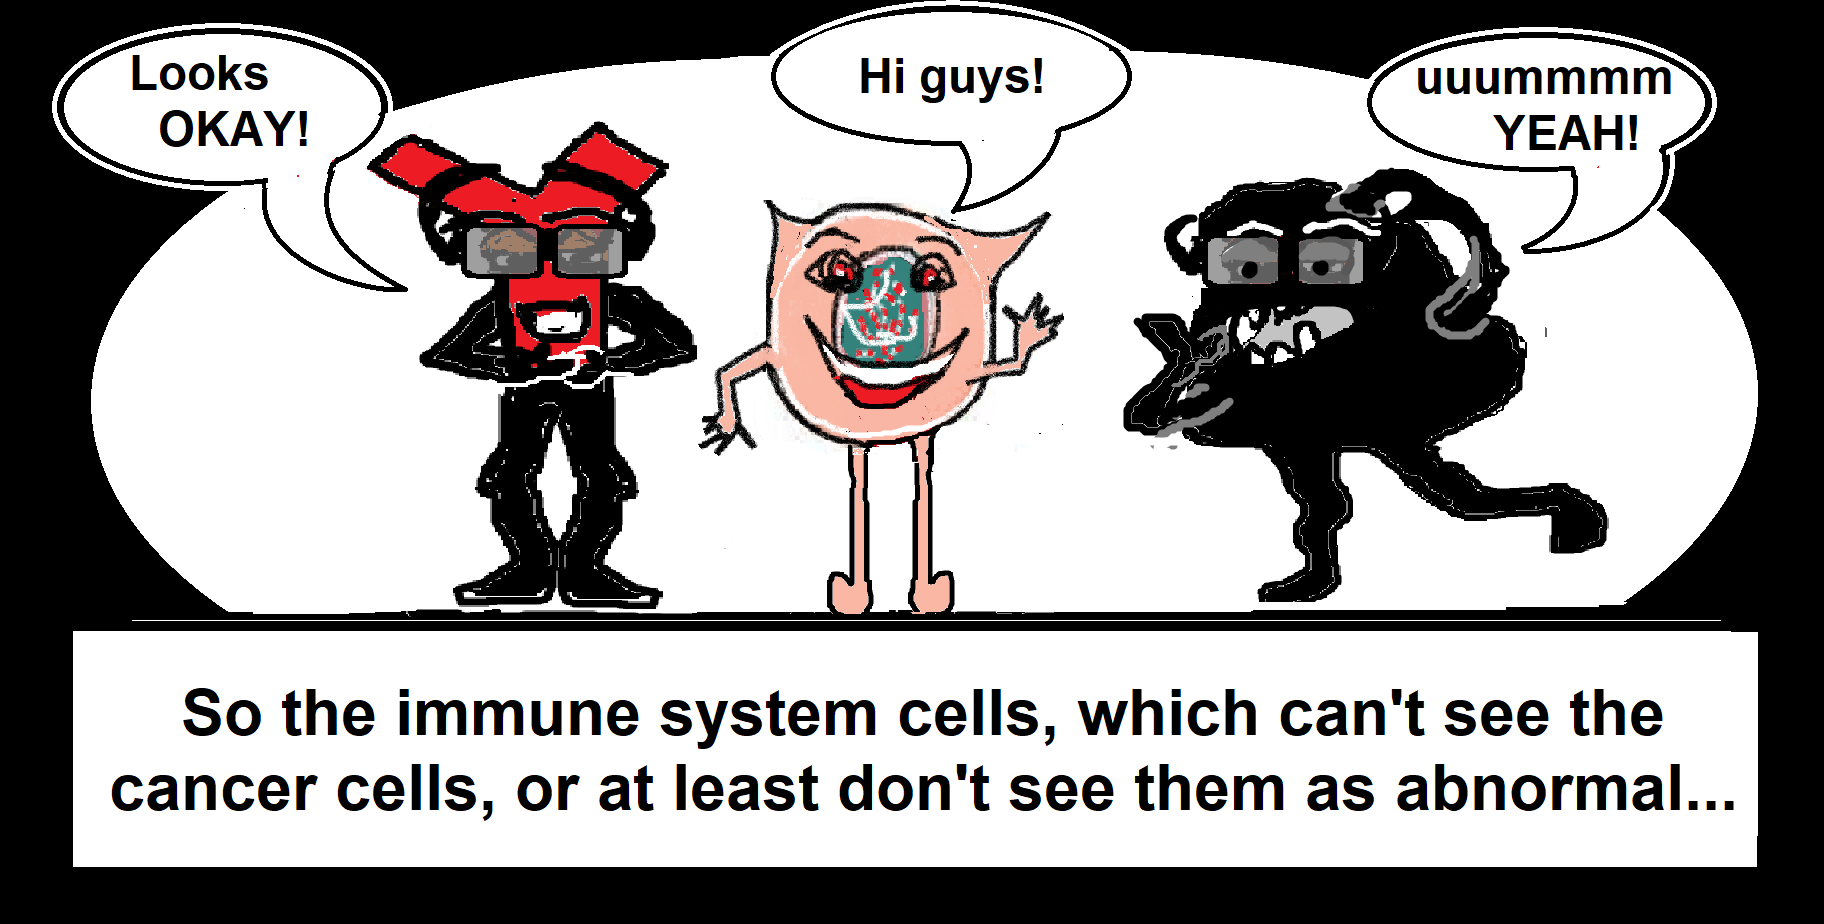 and immune system cells cannot see cancer cells